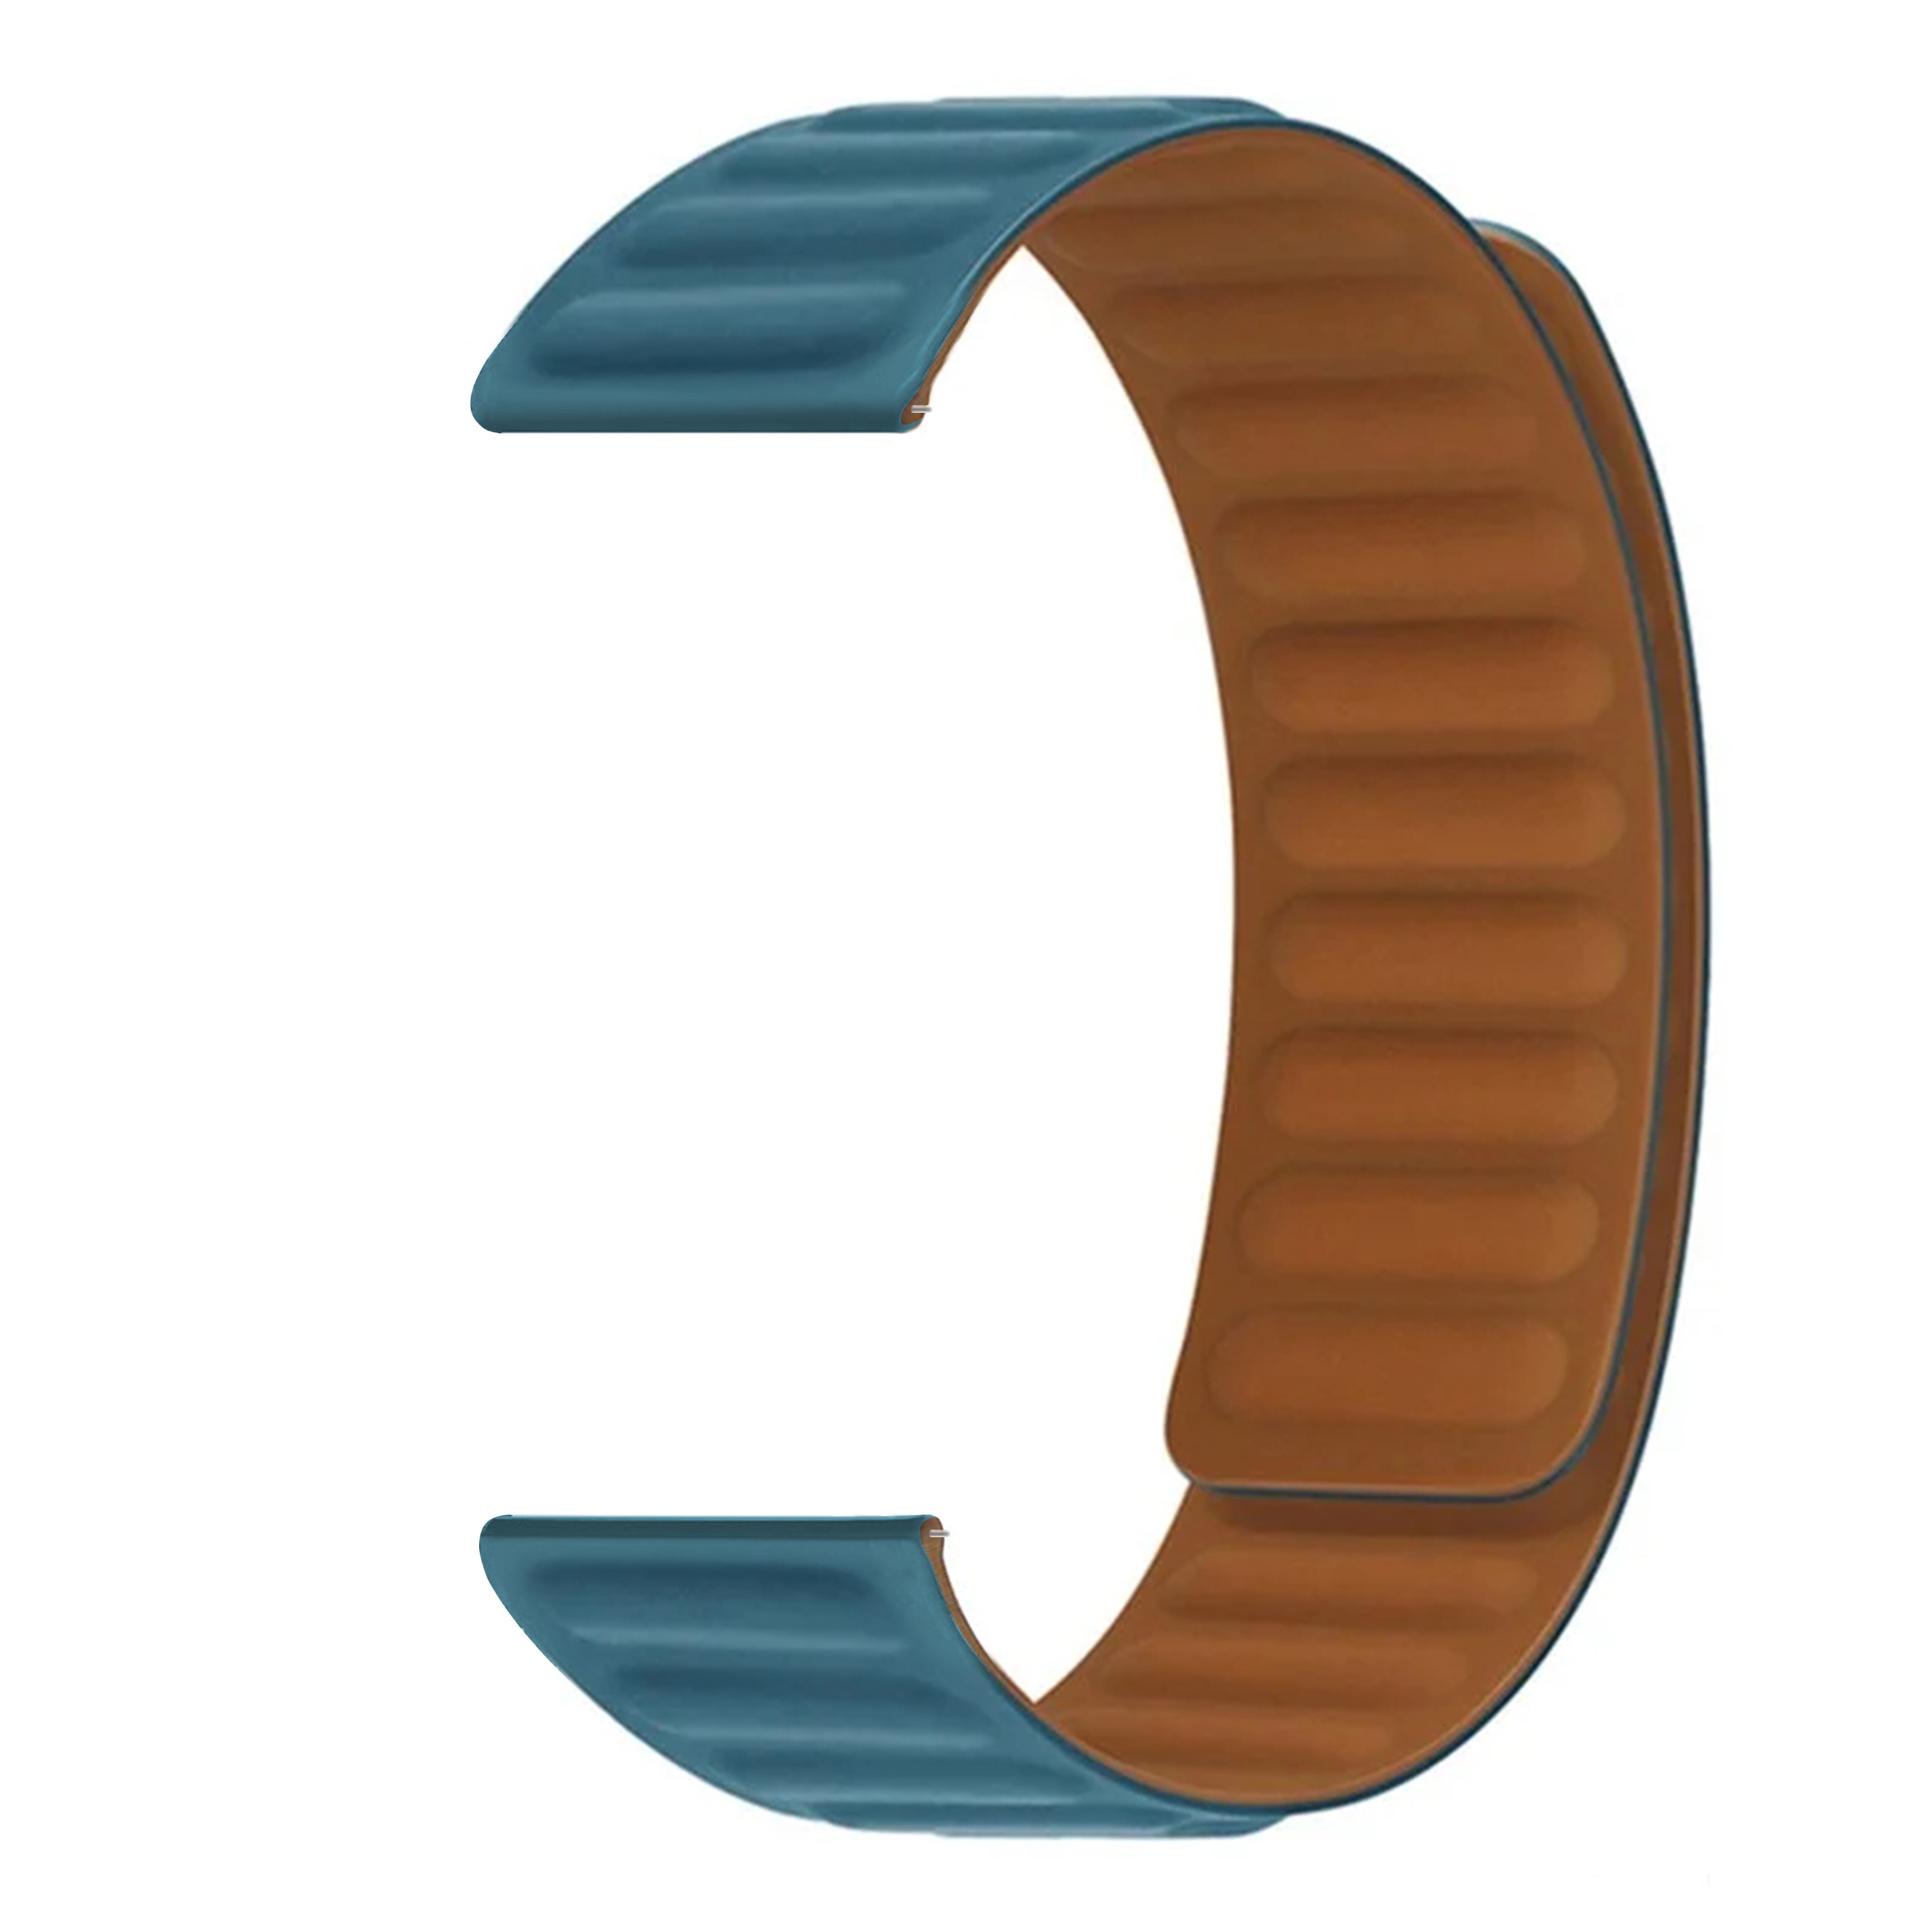 Hama Fit Watch 4910 Magnetic Silicone Band Blue